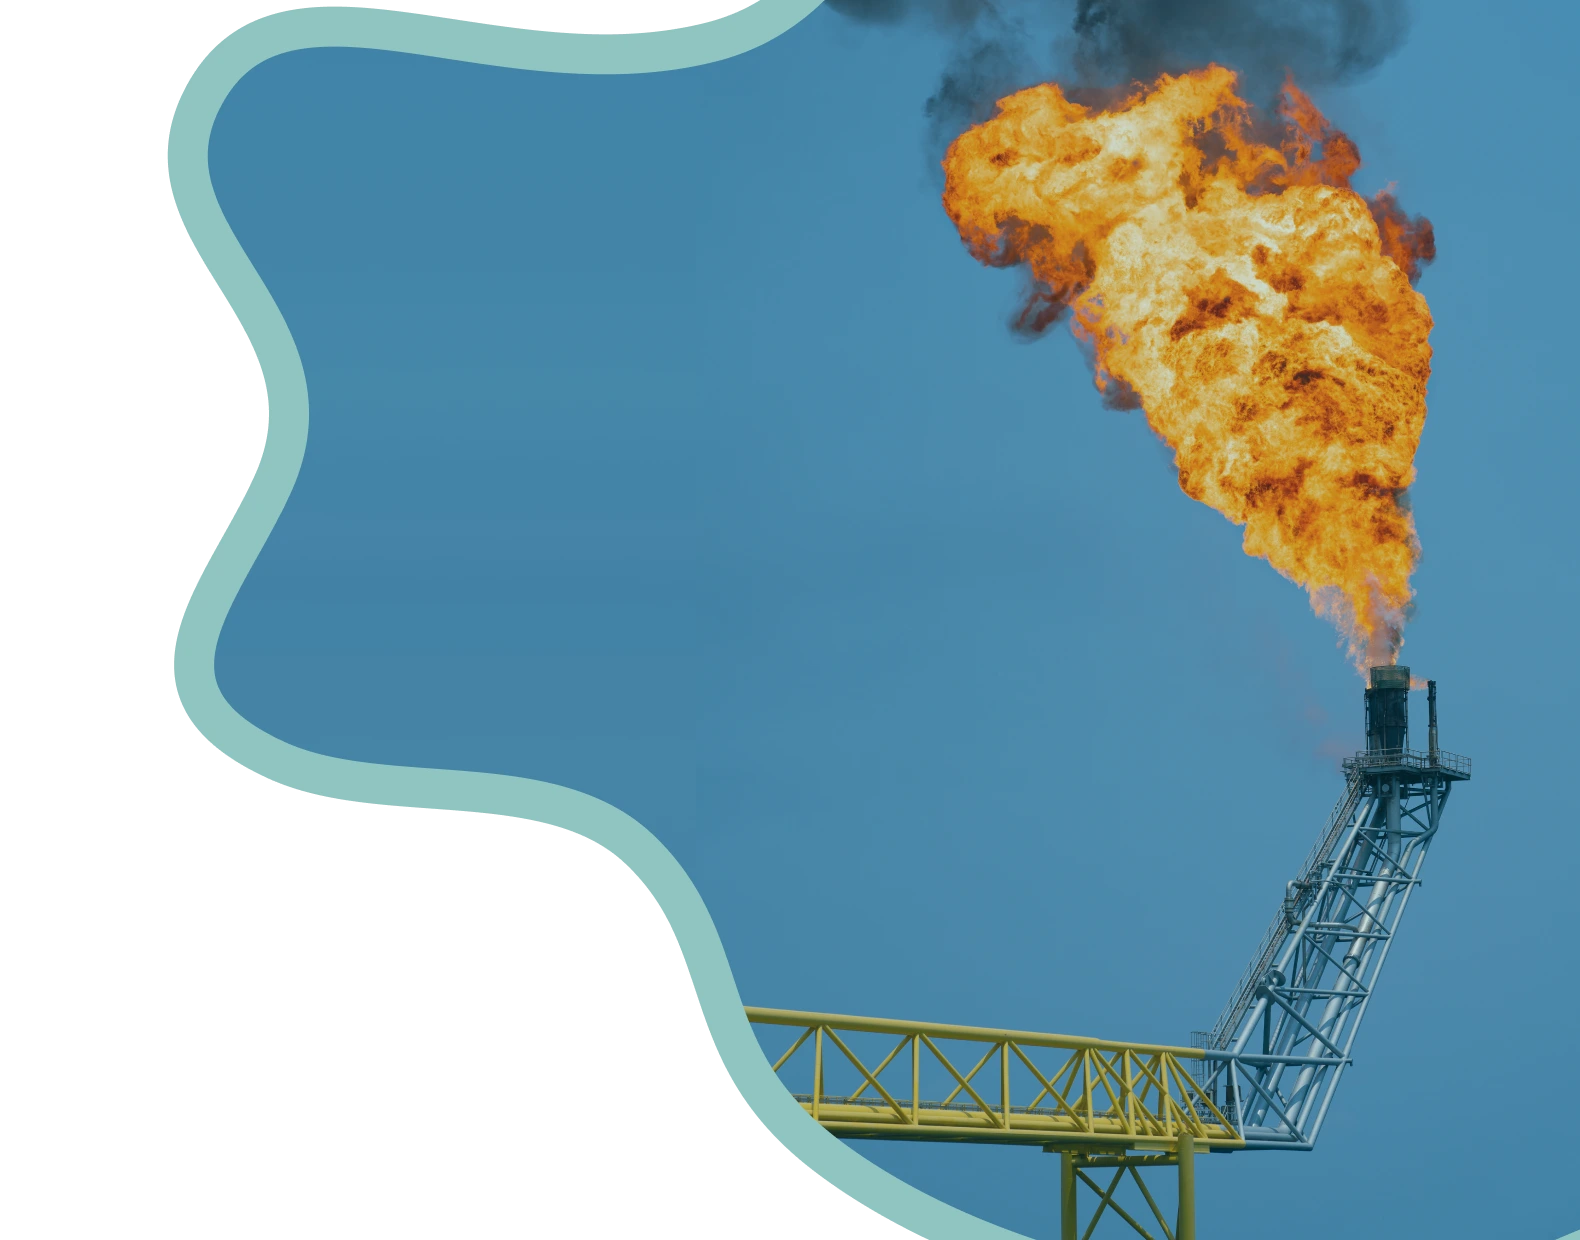 Custom Software Development Services for the Oil and Gas Industry